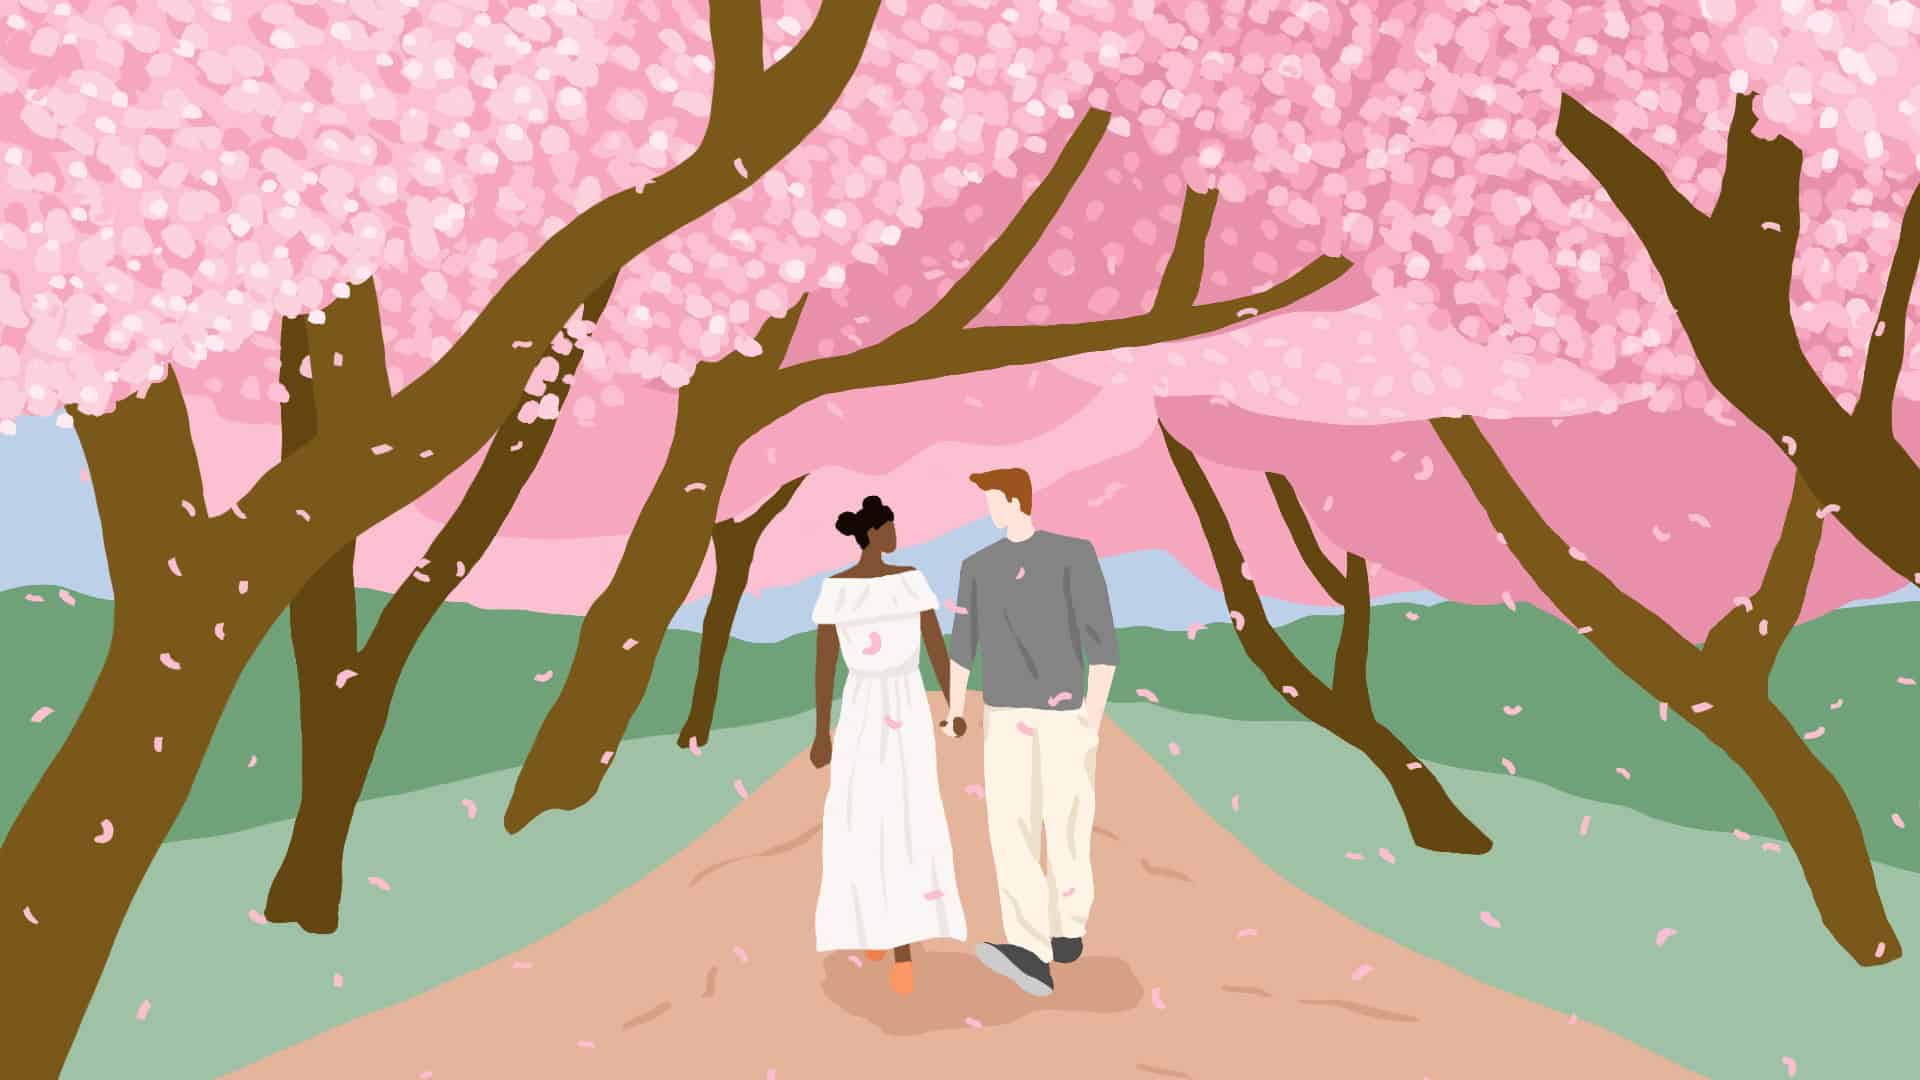 Illustration of a bride and groom in casual clothing strolling under cherry blossom trees.